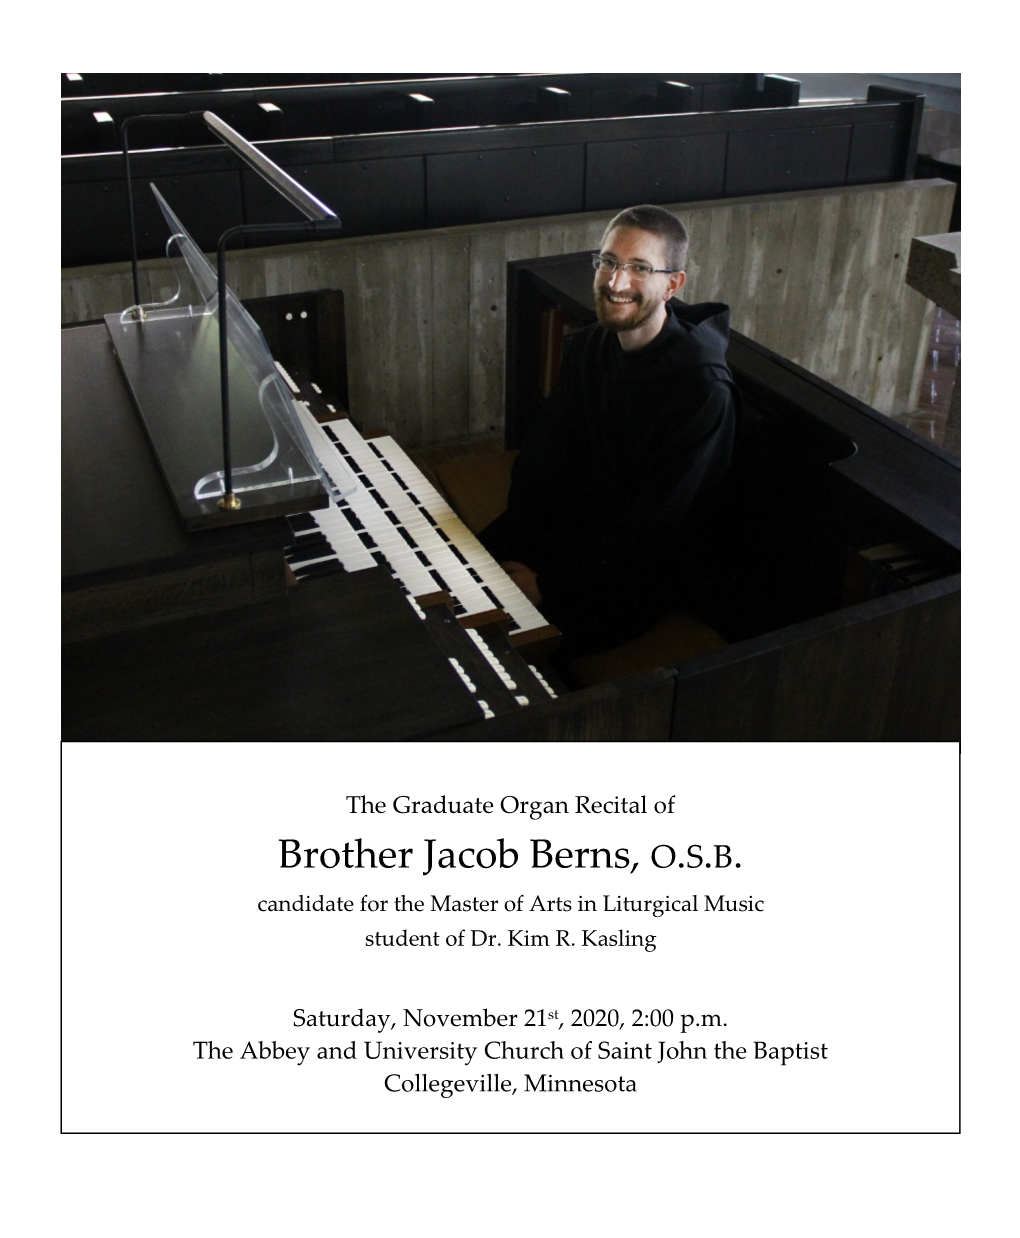 Brother Jacob Berns, O.S.B. Candidate for the Master of Arts in Liturgical Music Student of Dr